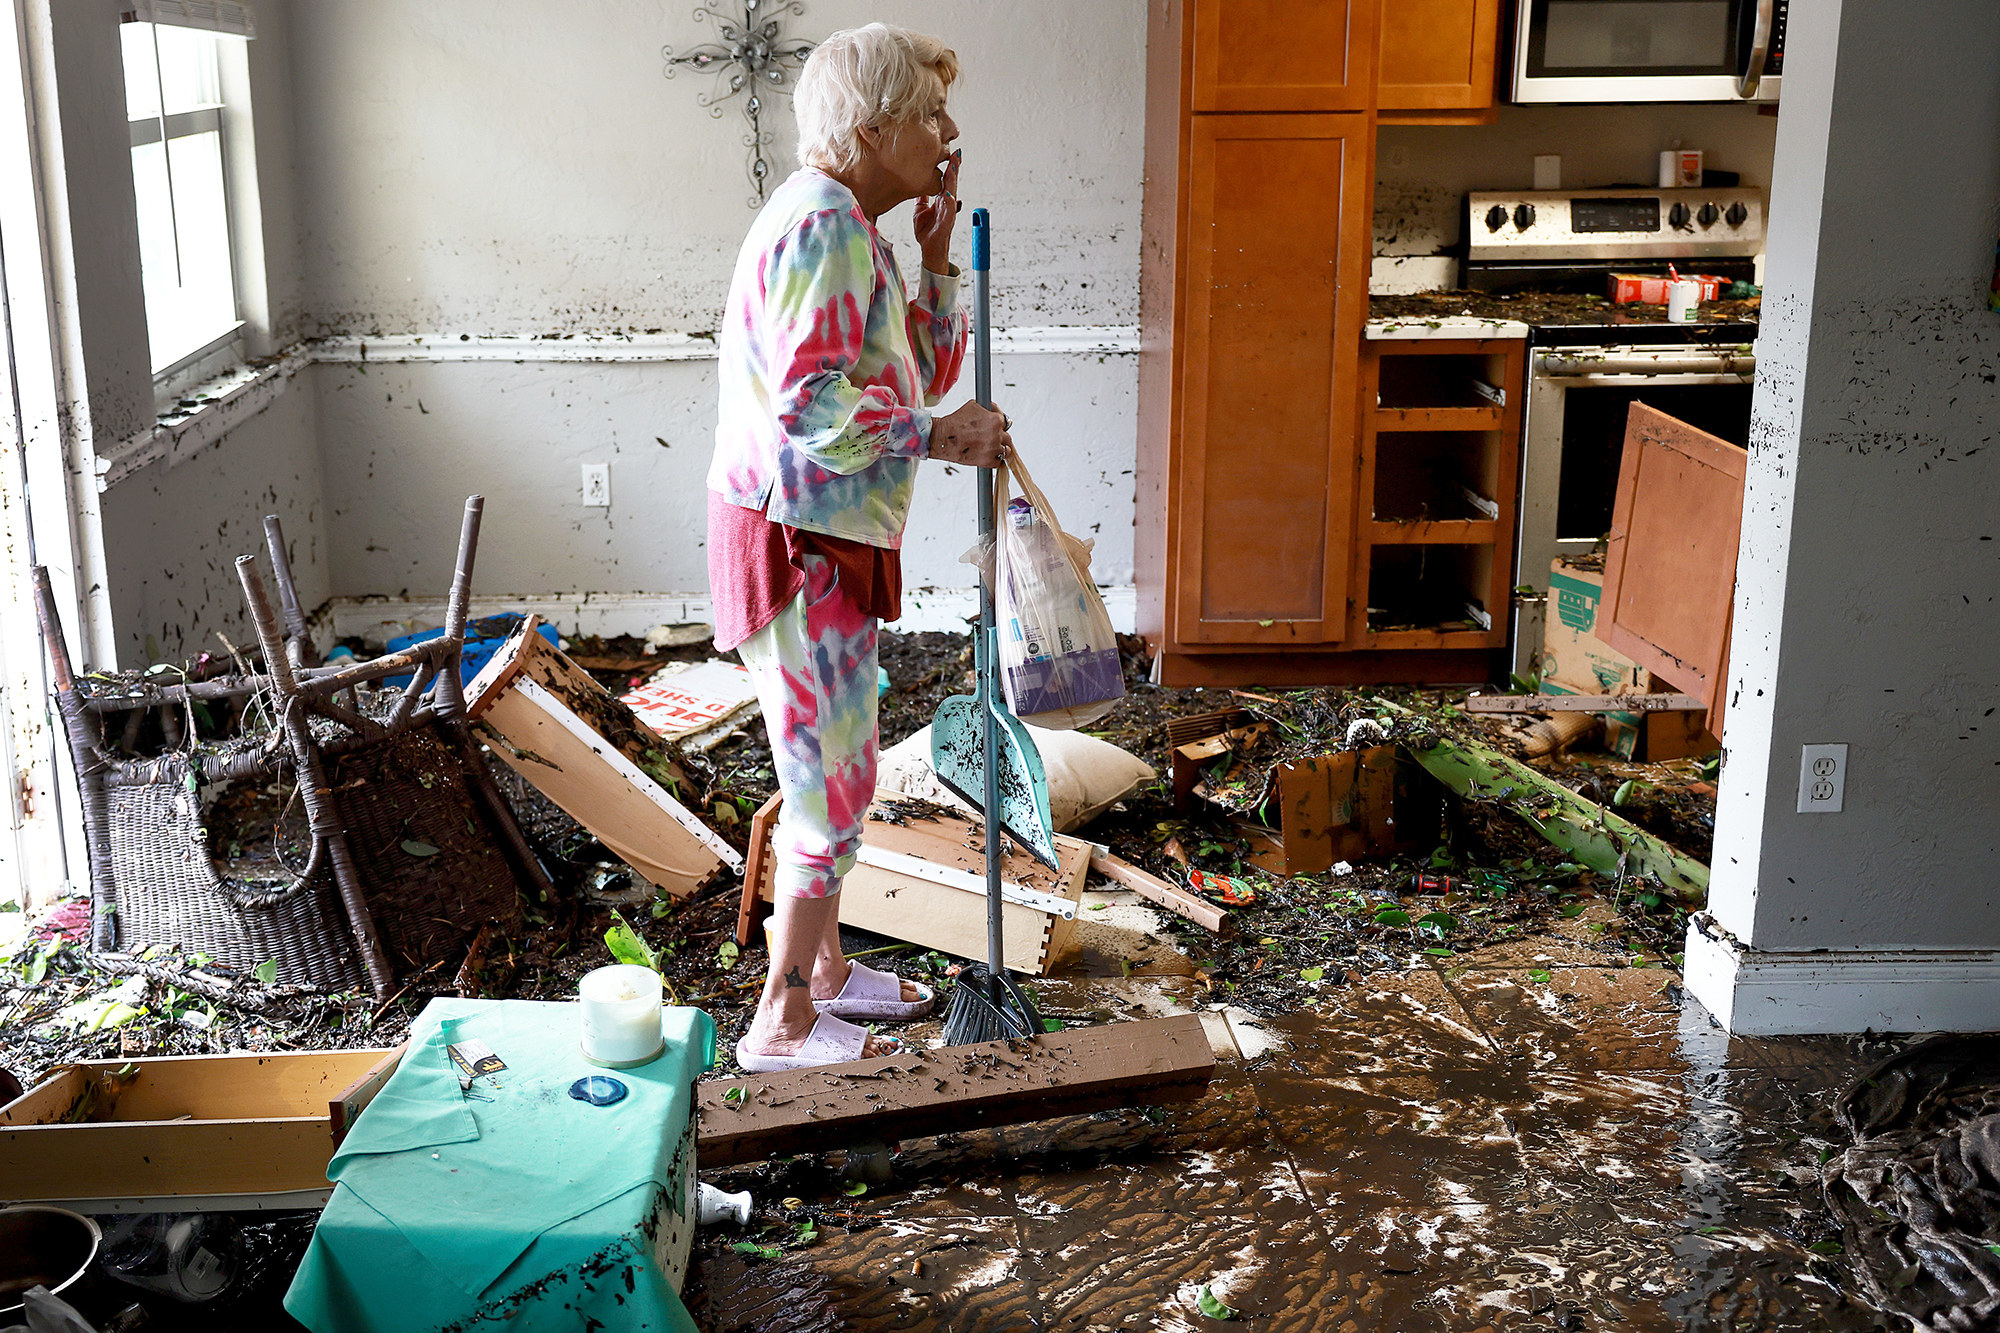 A woman holding a broom and dustpan stands in a room filled with mud and debris